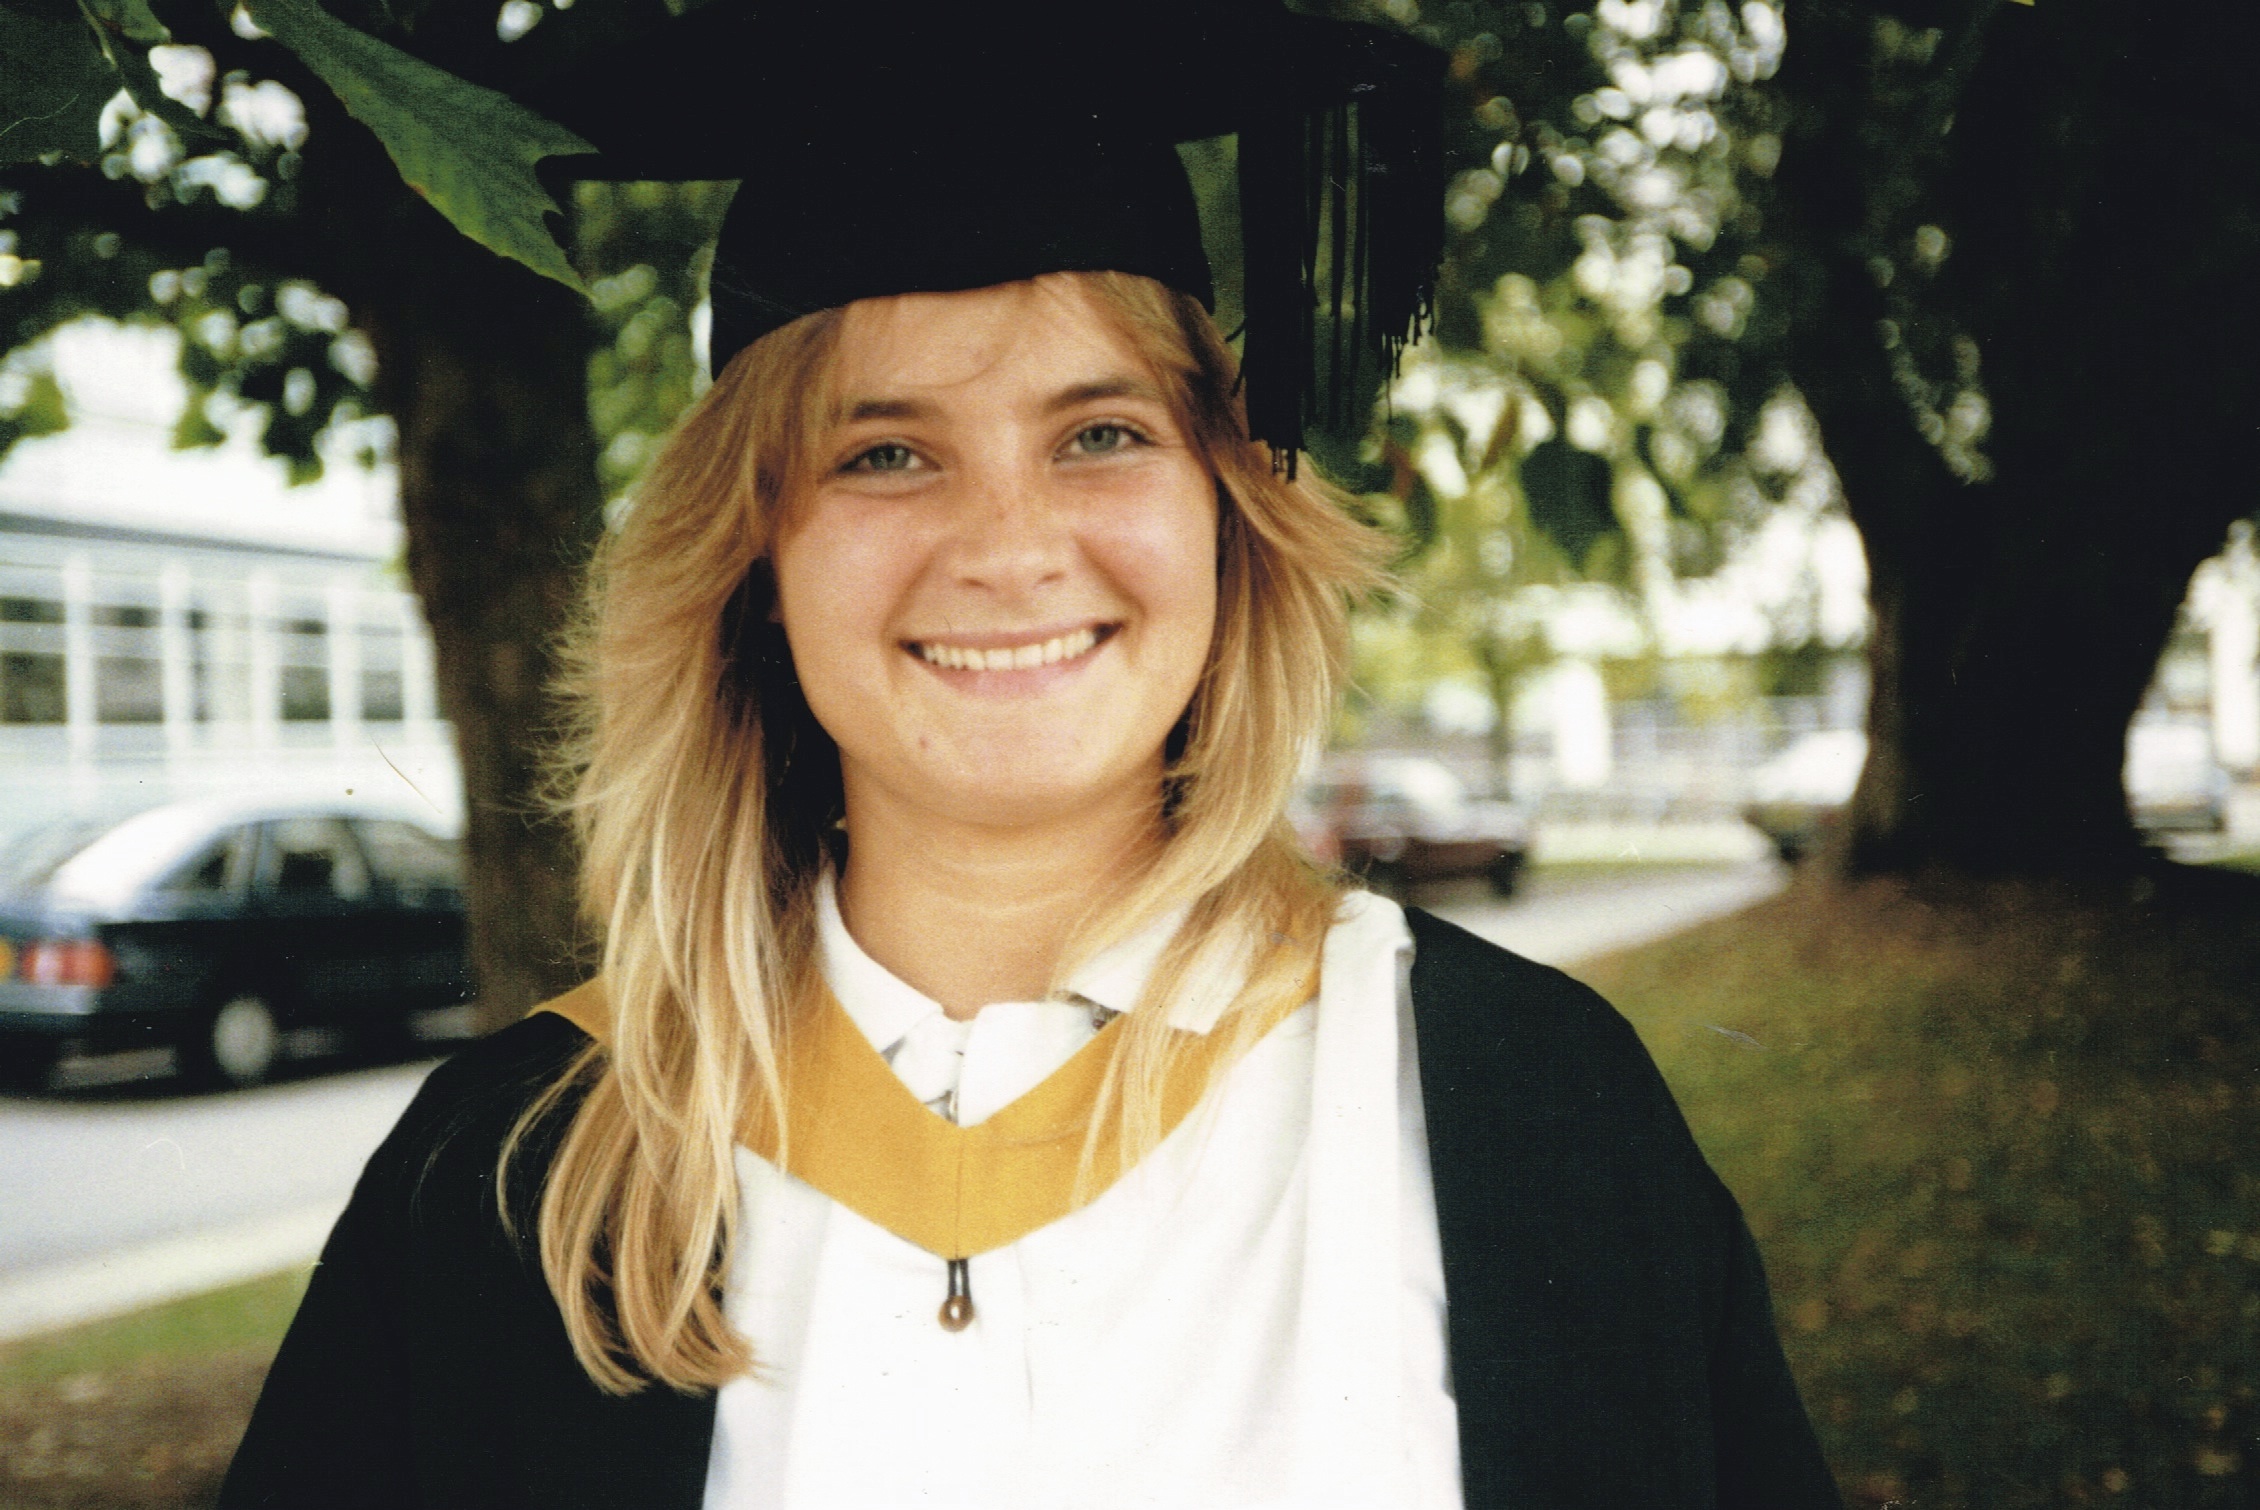 Nicola on her graduation day, in her gown and hat, smiling at the camera